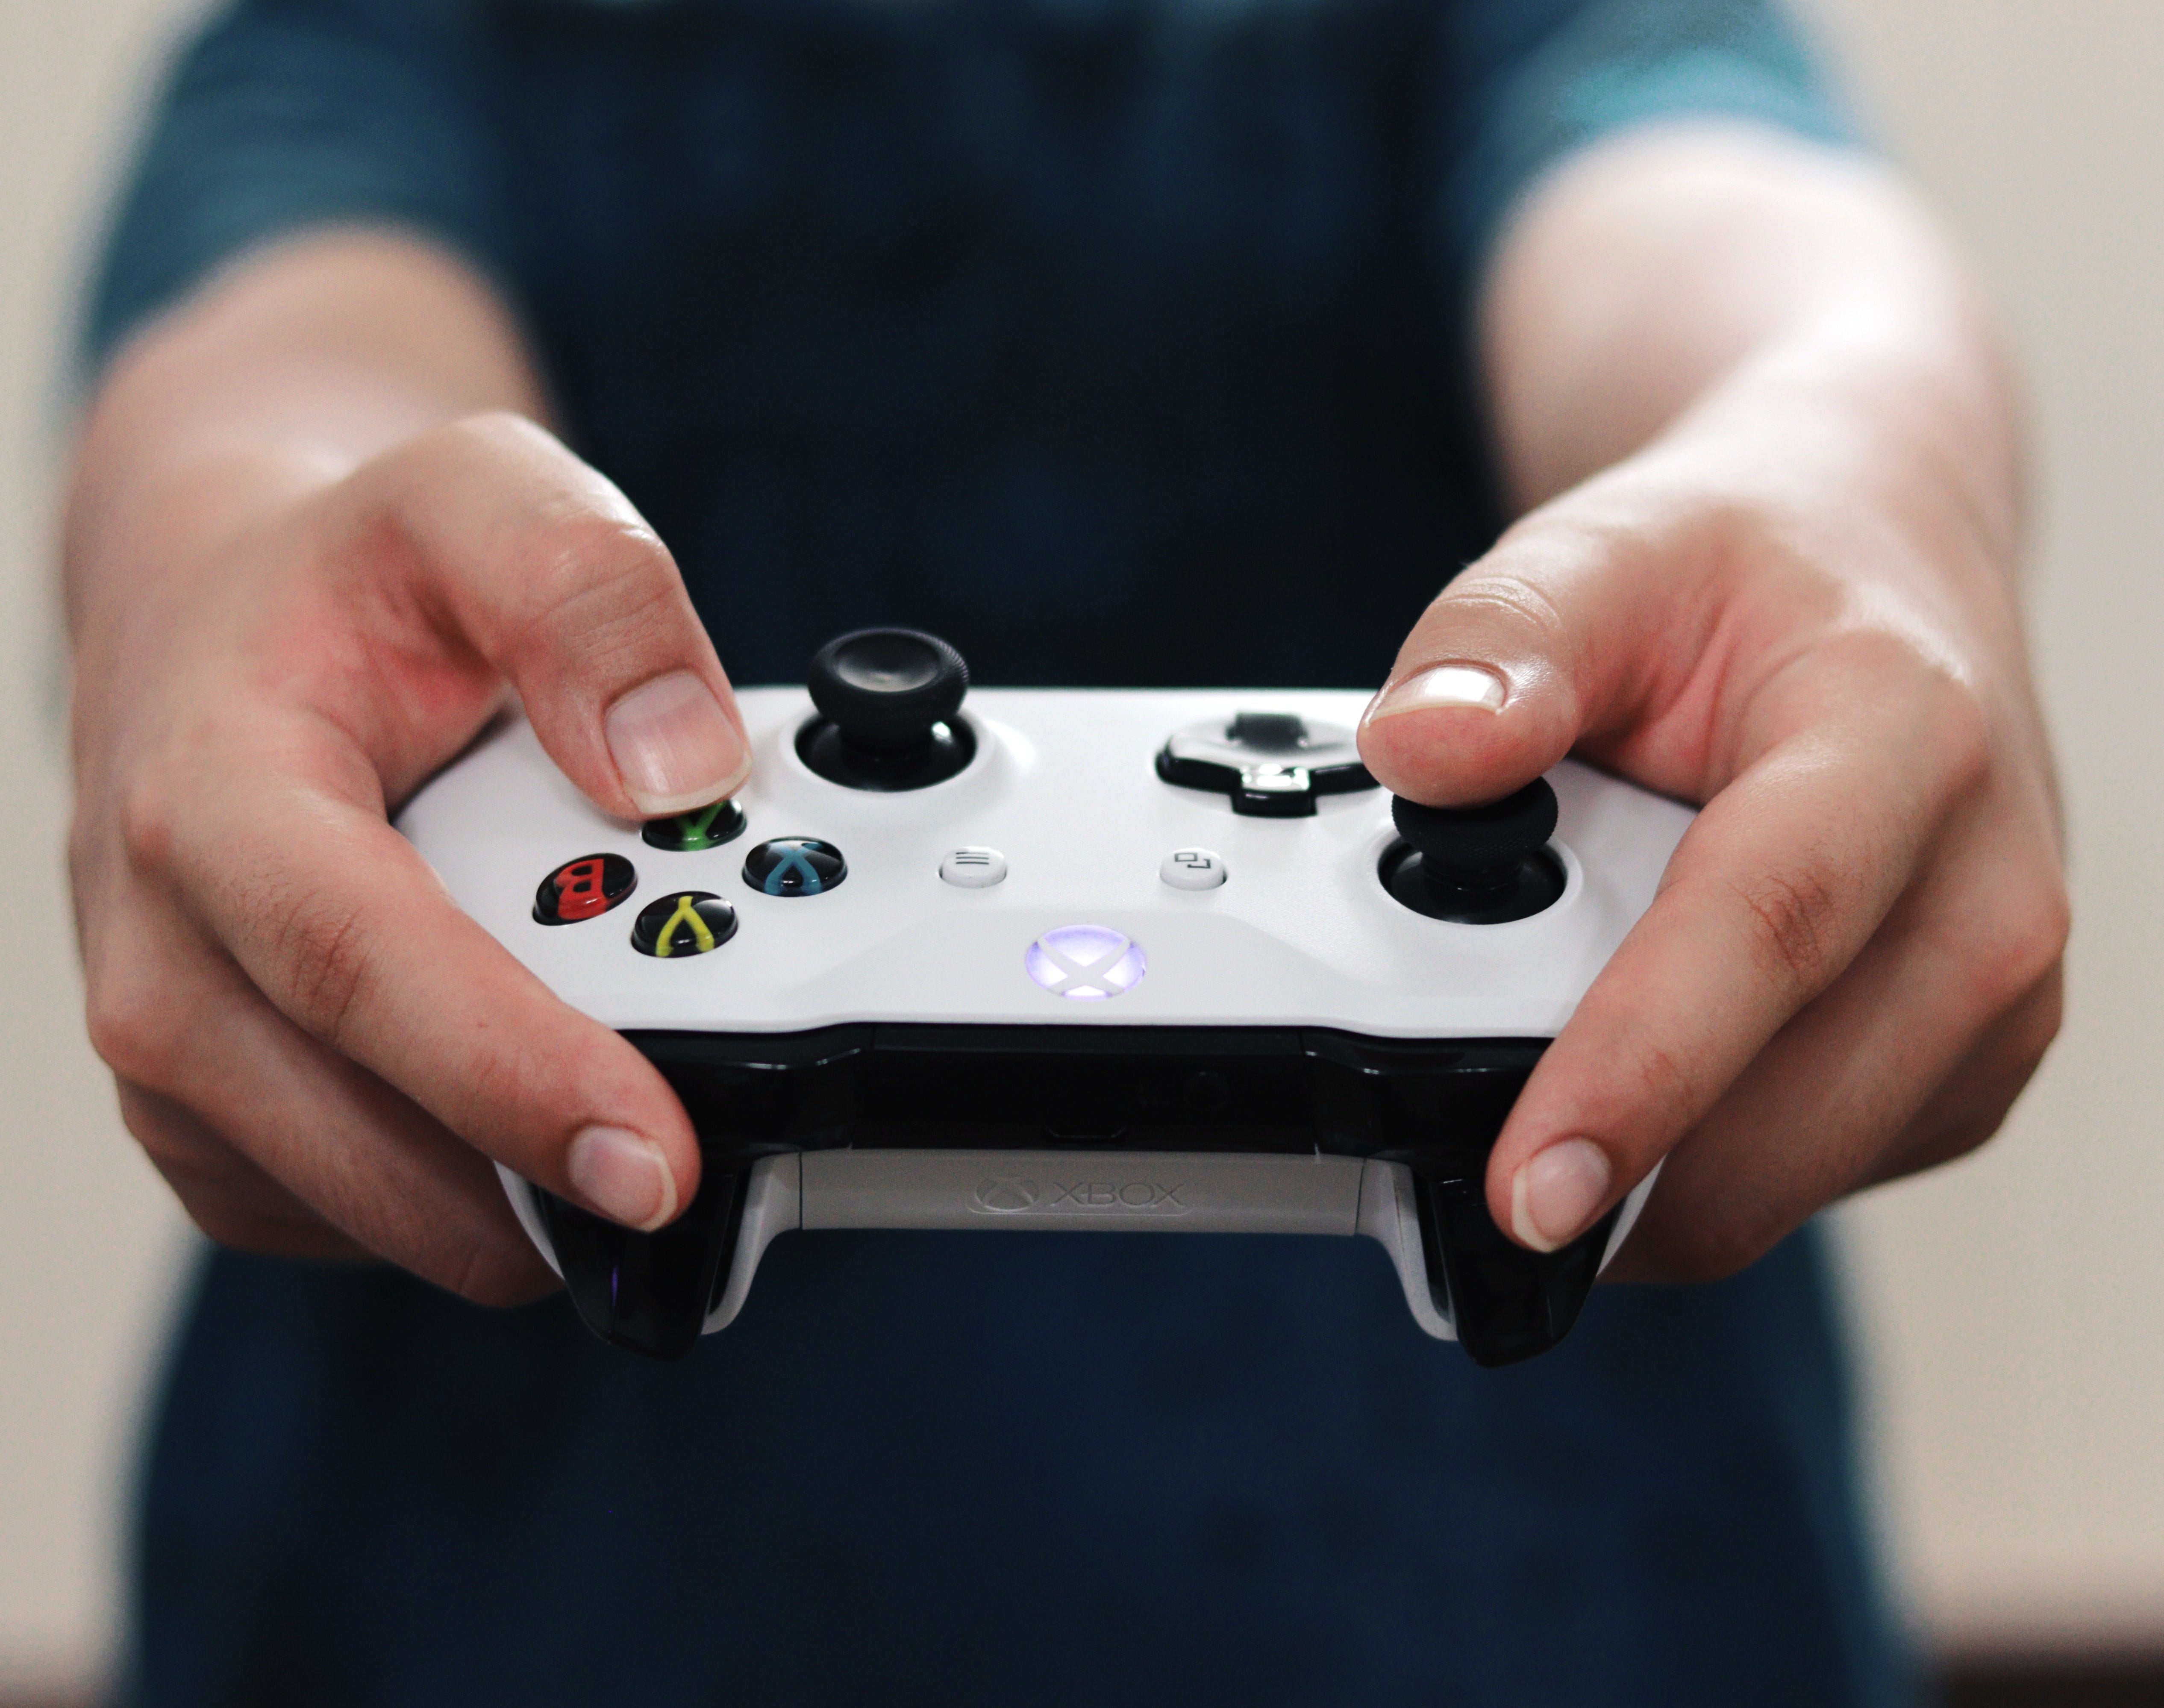 Should my son play video games with strangers online?